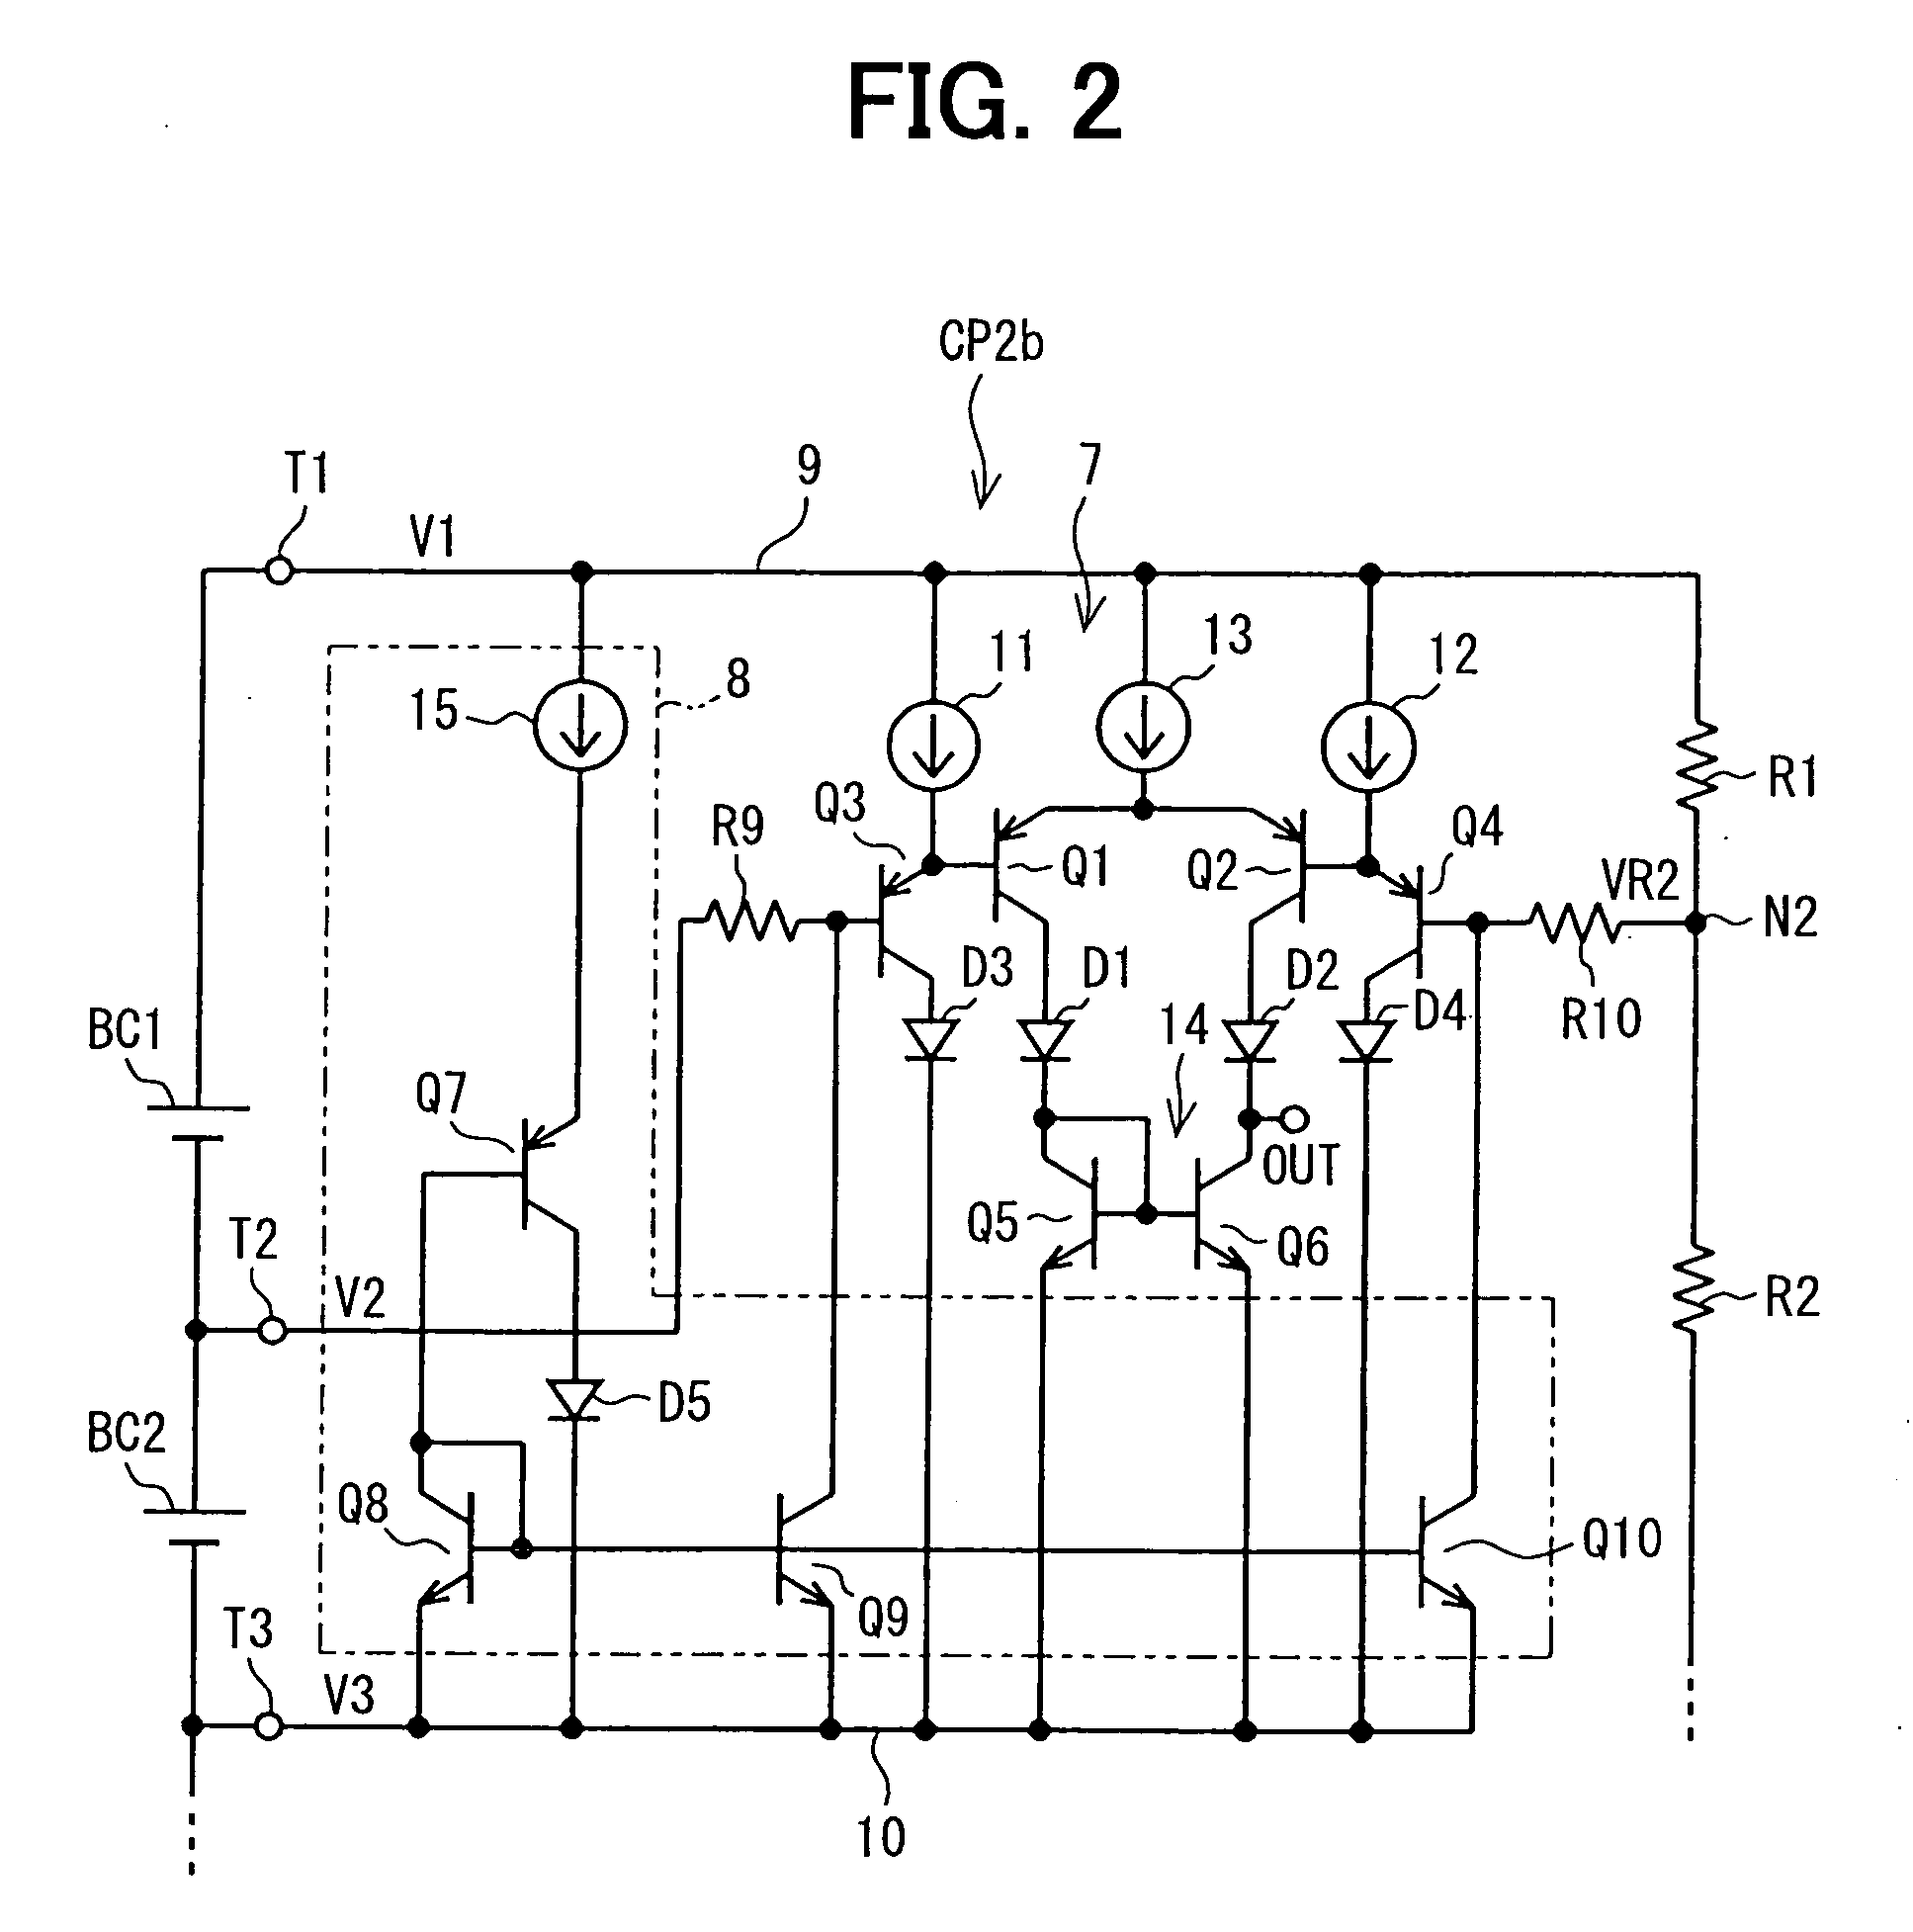 Cell voltage equalization apparatus for combined battery pack